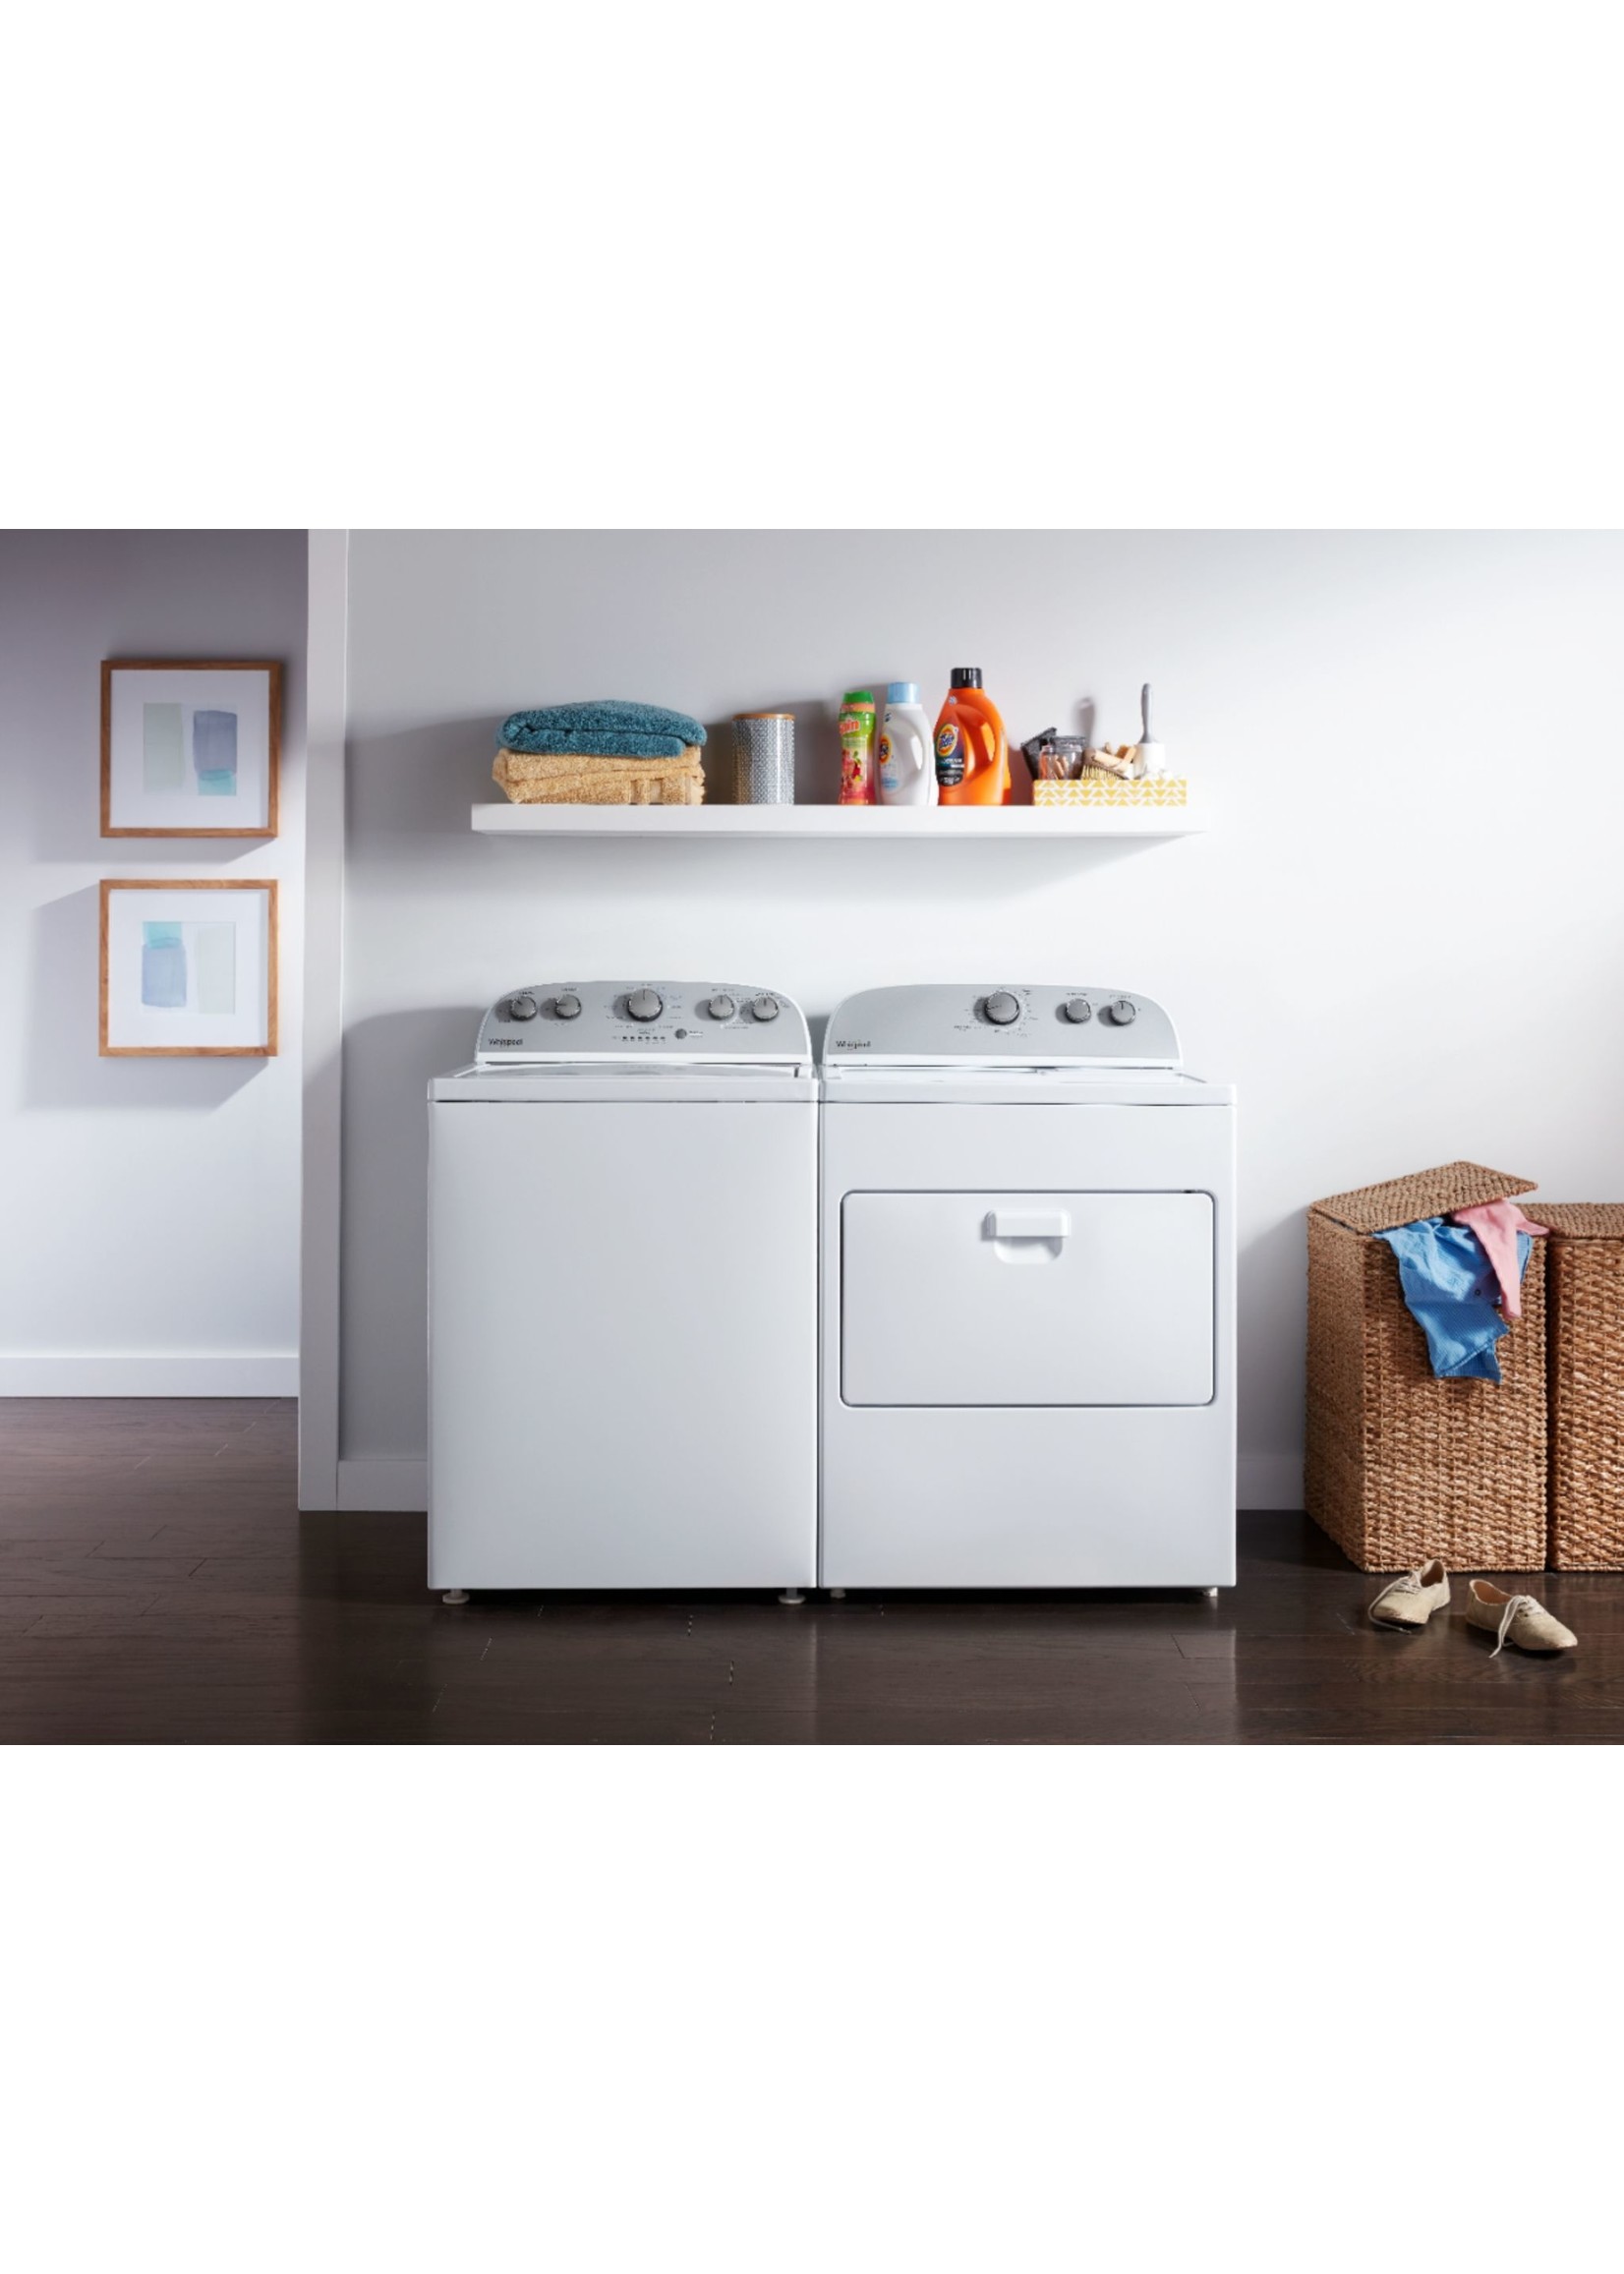 Whirlpool Package - Whirlpool - 3.8 Cu. Ft. High Efficiency Top Load Washer with 360 Wash Agitator and 7 Cu. Ft. Gas Dryer with AutoDry Drying System - White